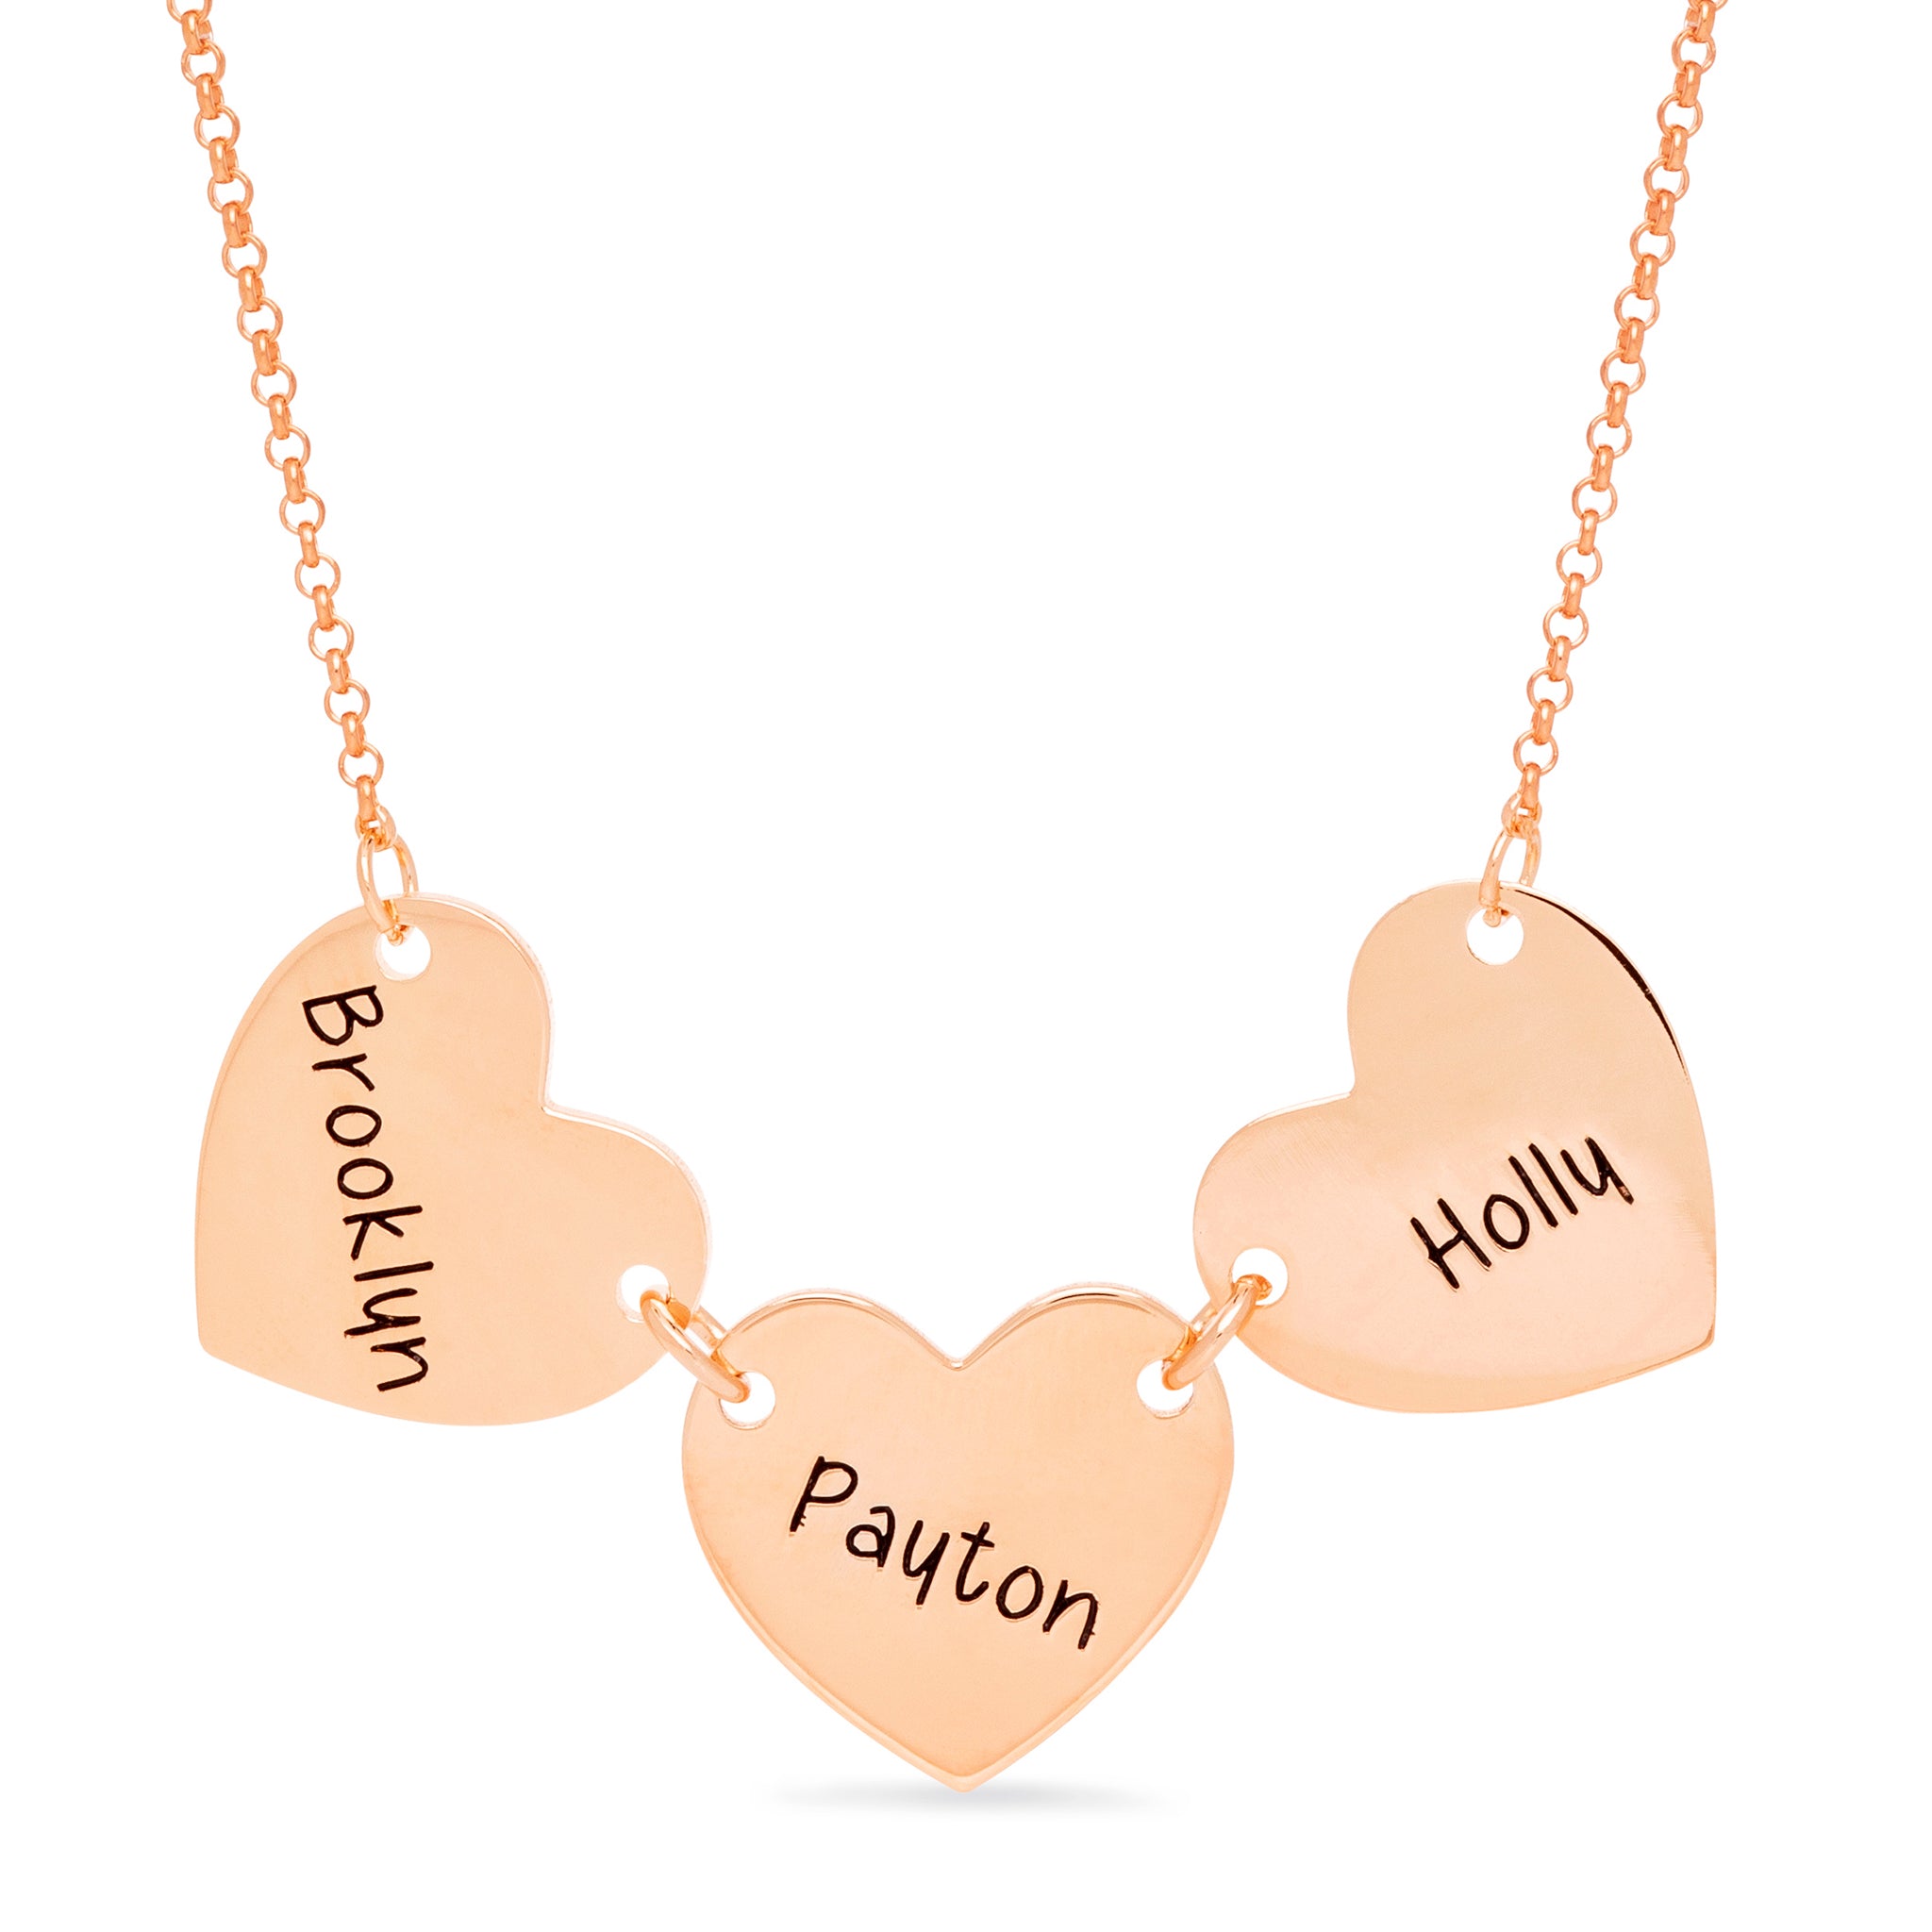 Heart Charm Necklace - 3 To 5 Charms